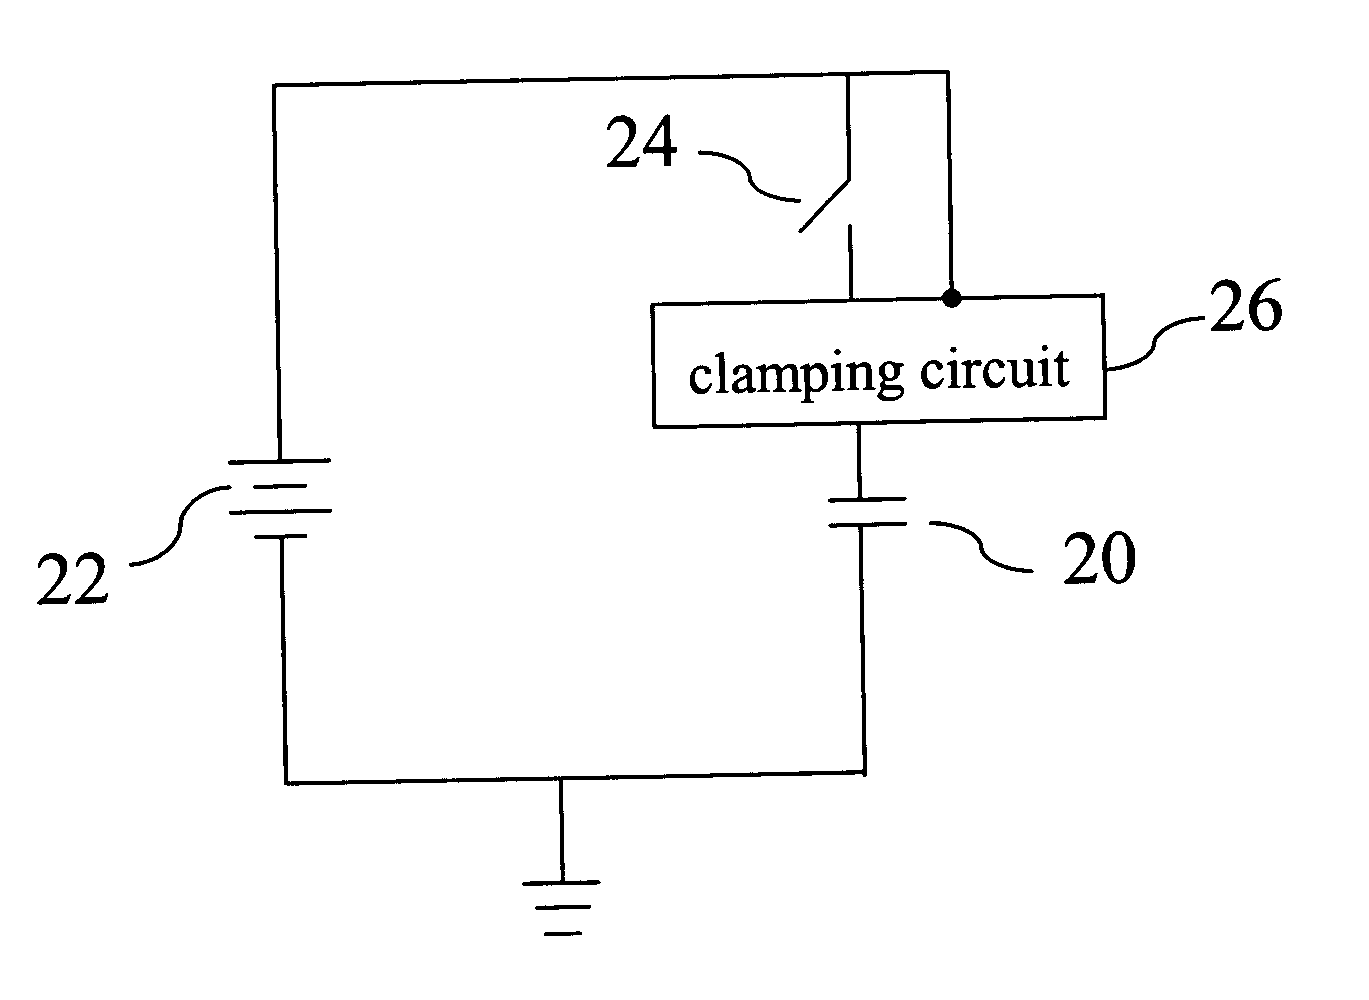 Capacitance charge device with adjustable clamping voltage